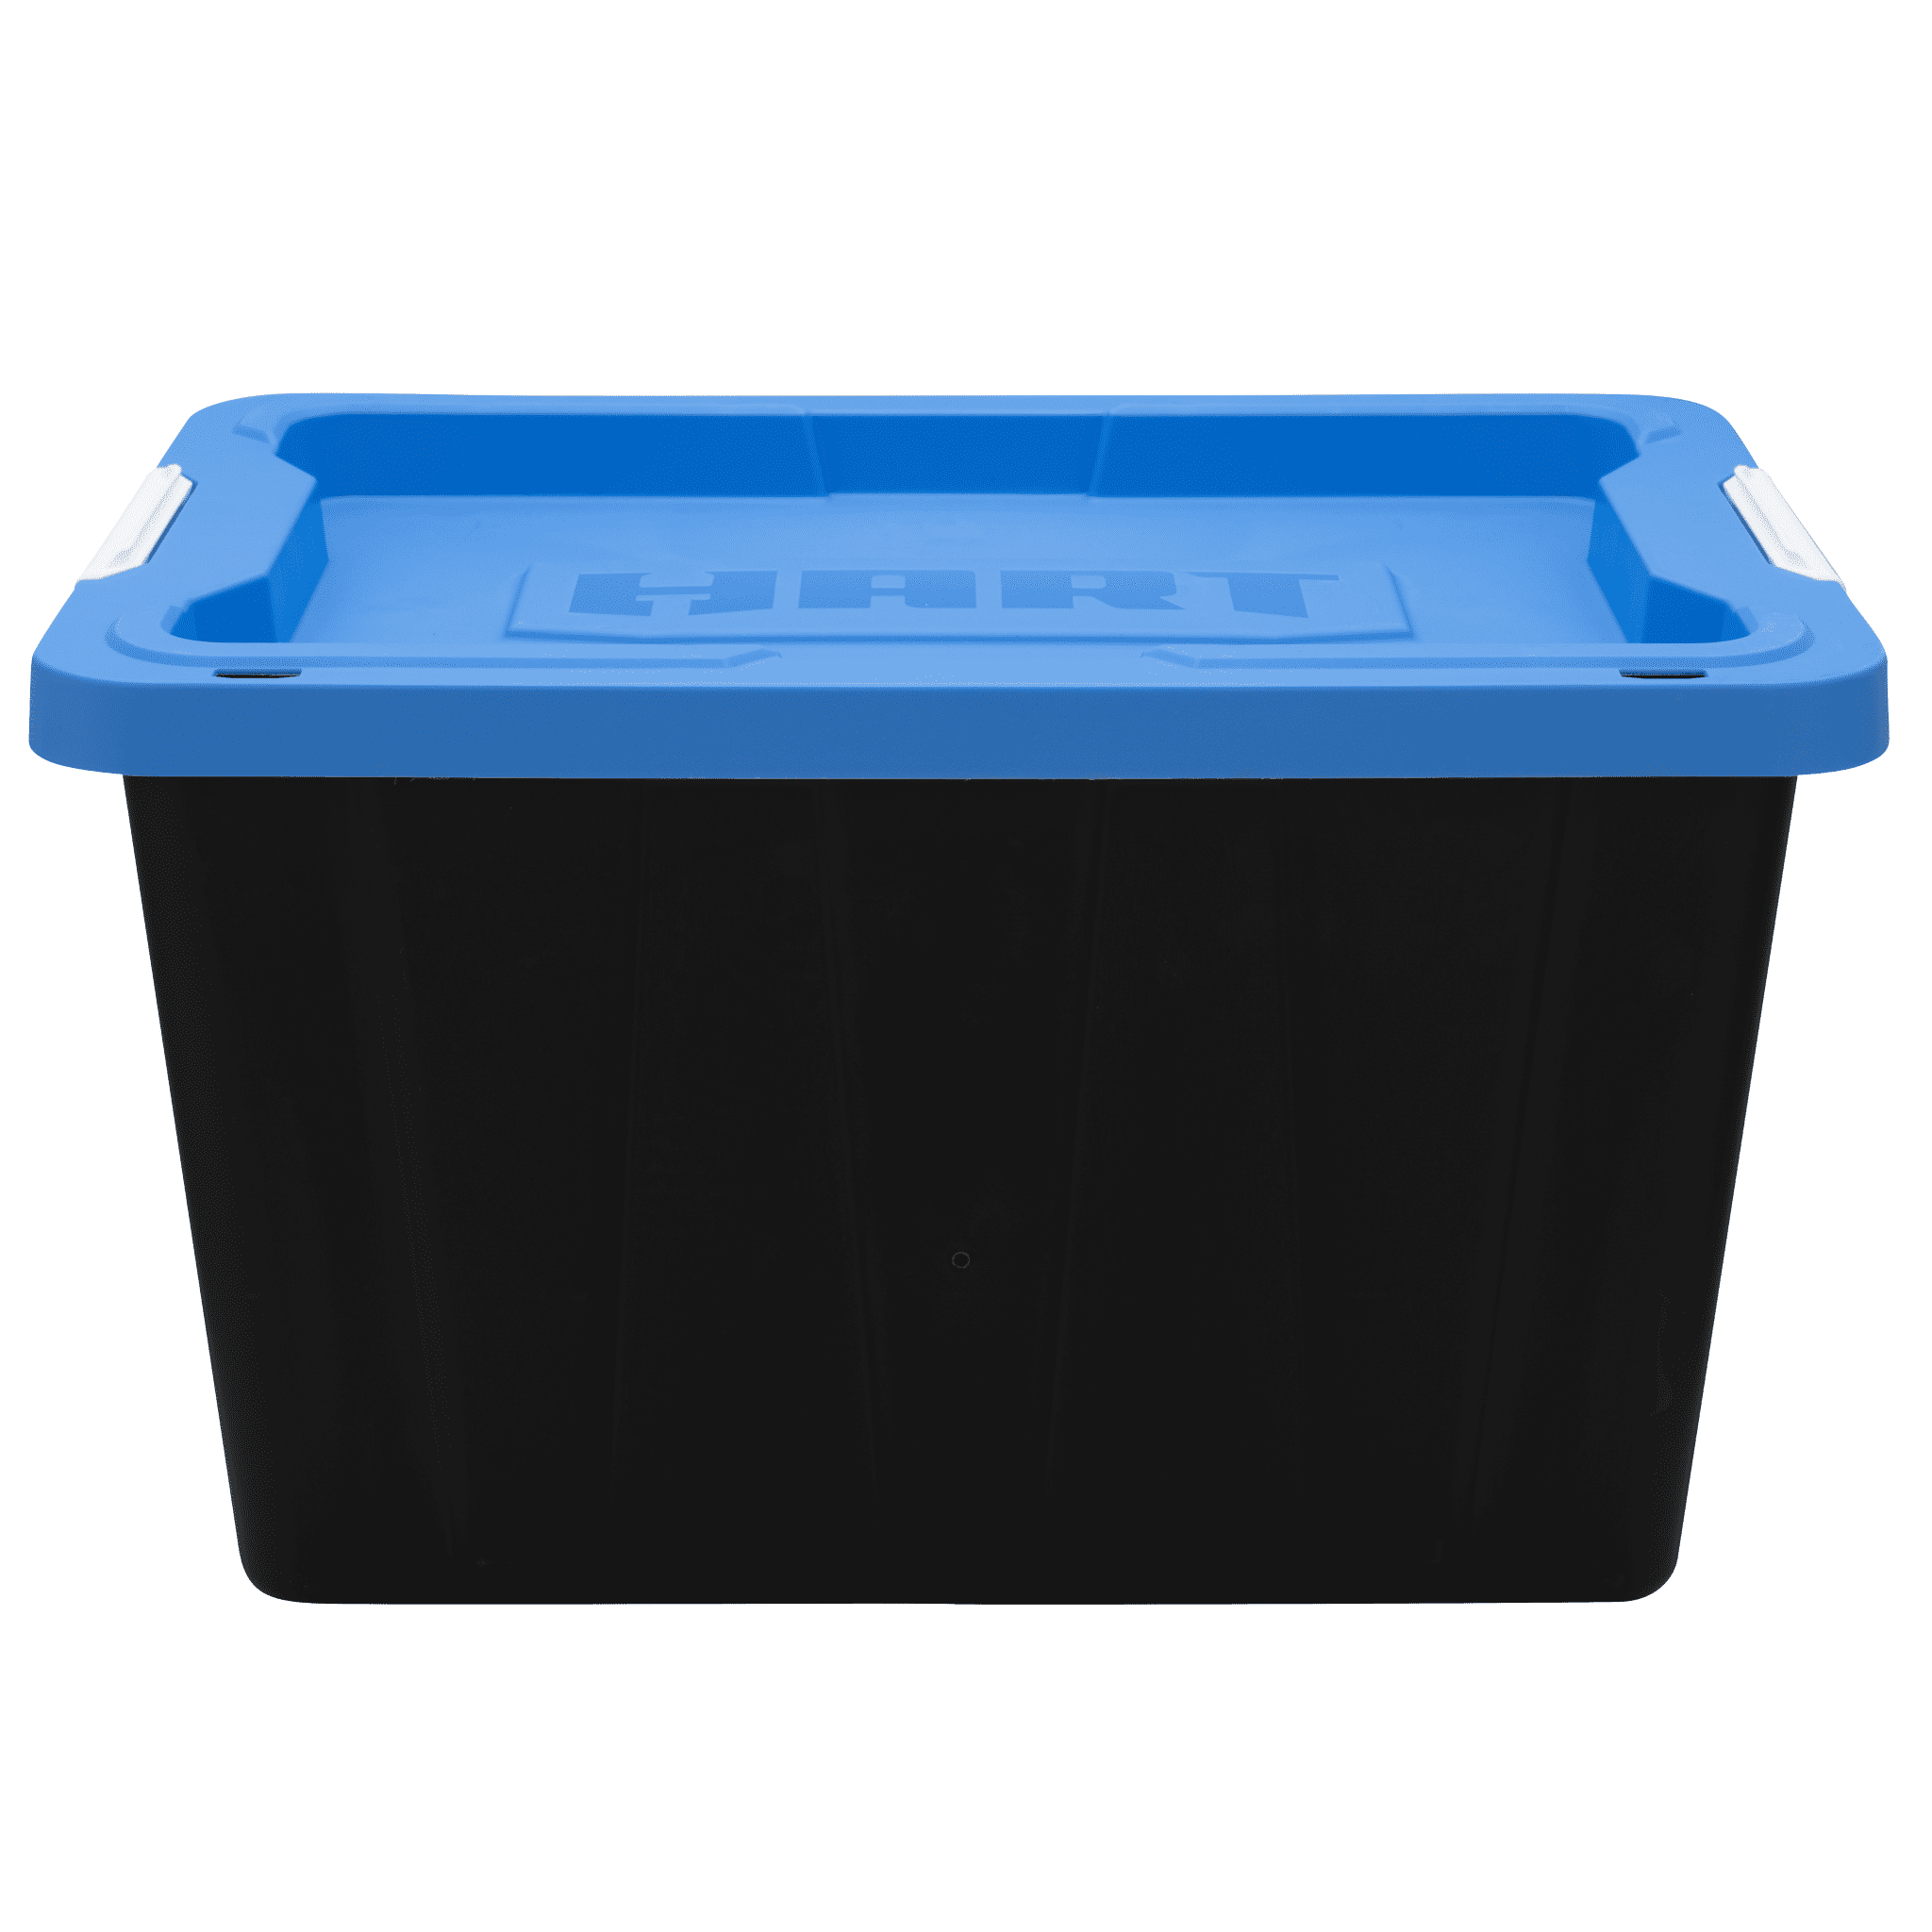  American Lifting 12-Gallon Storage Containers - Tough with Lids  Durable Stackable - Keep Your Belongings Safe and Organized - (4 Pack -  Blue)